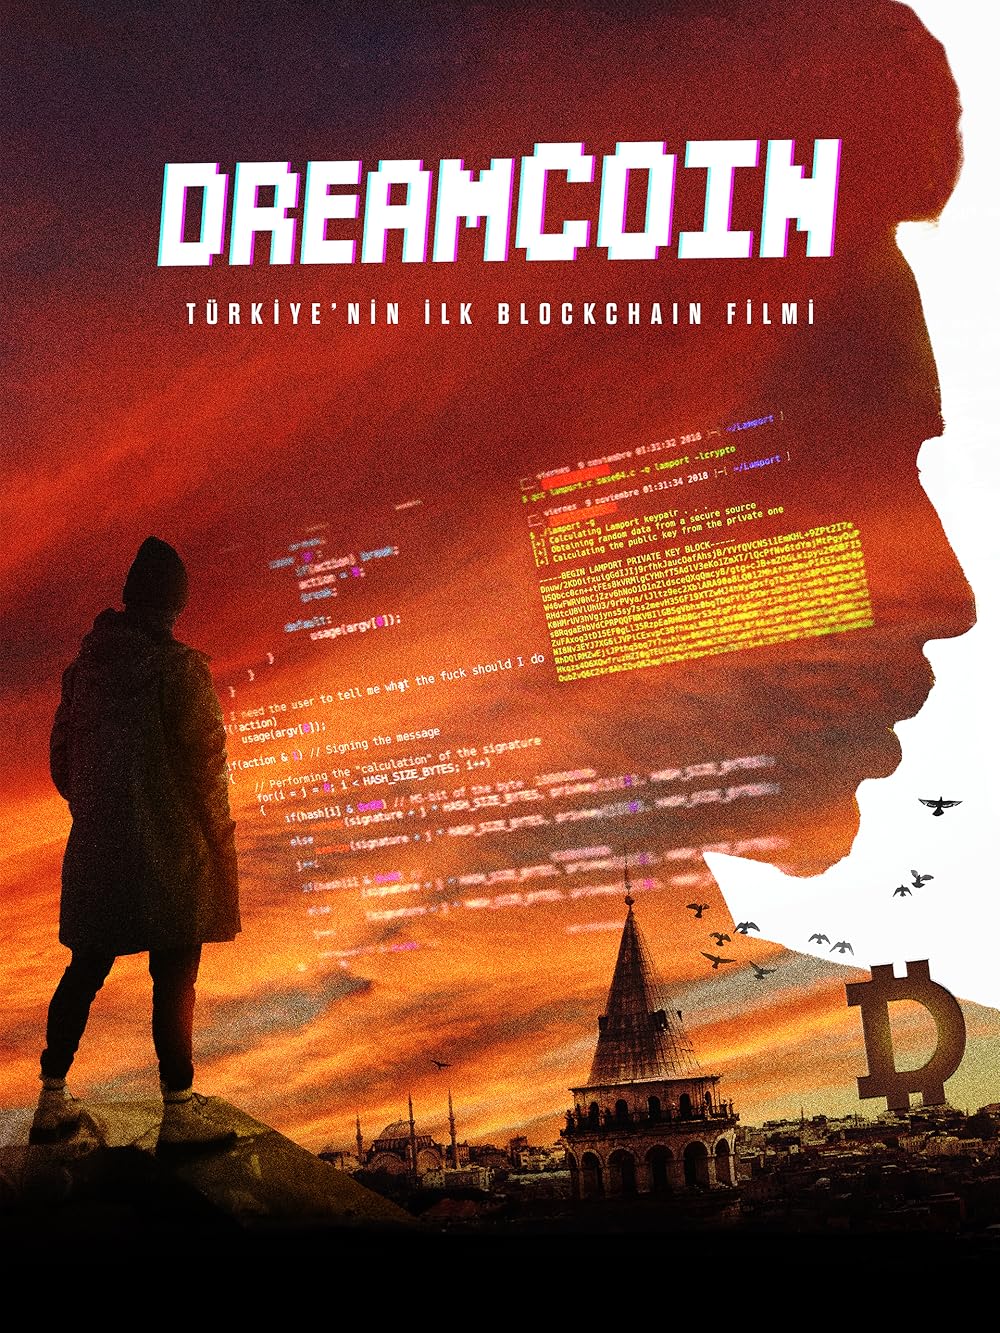 Dreamcoin (2024)